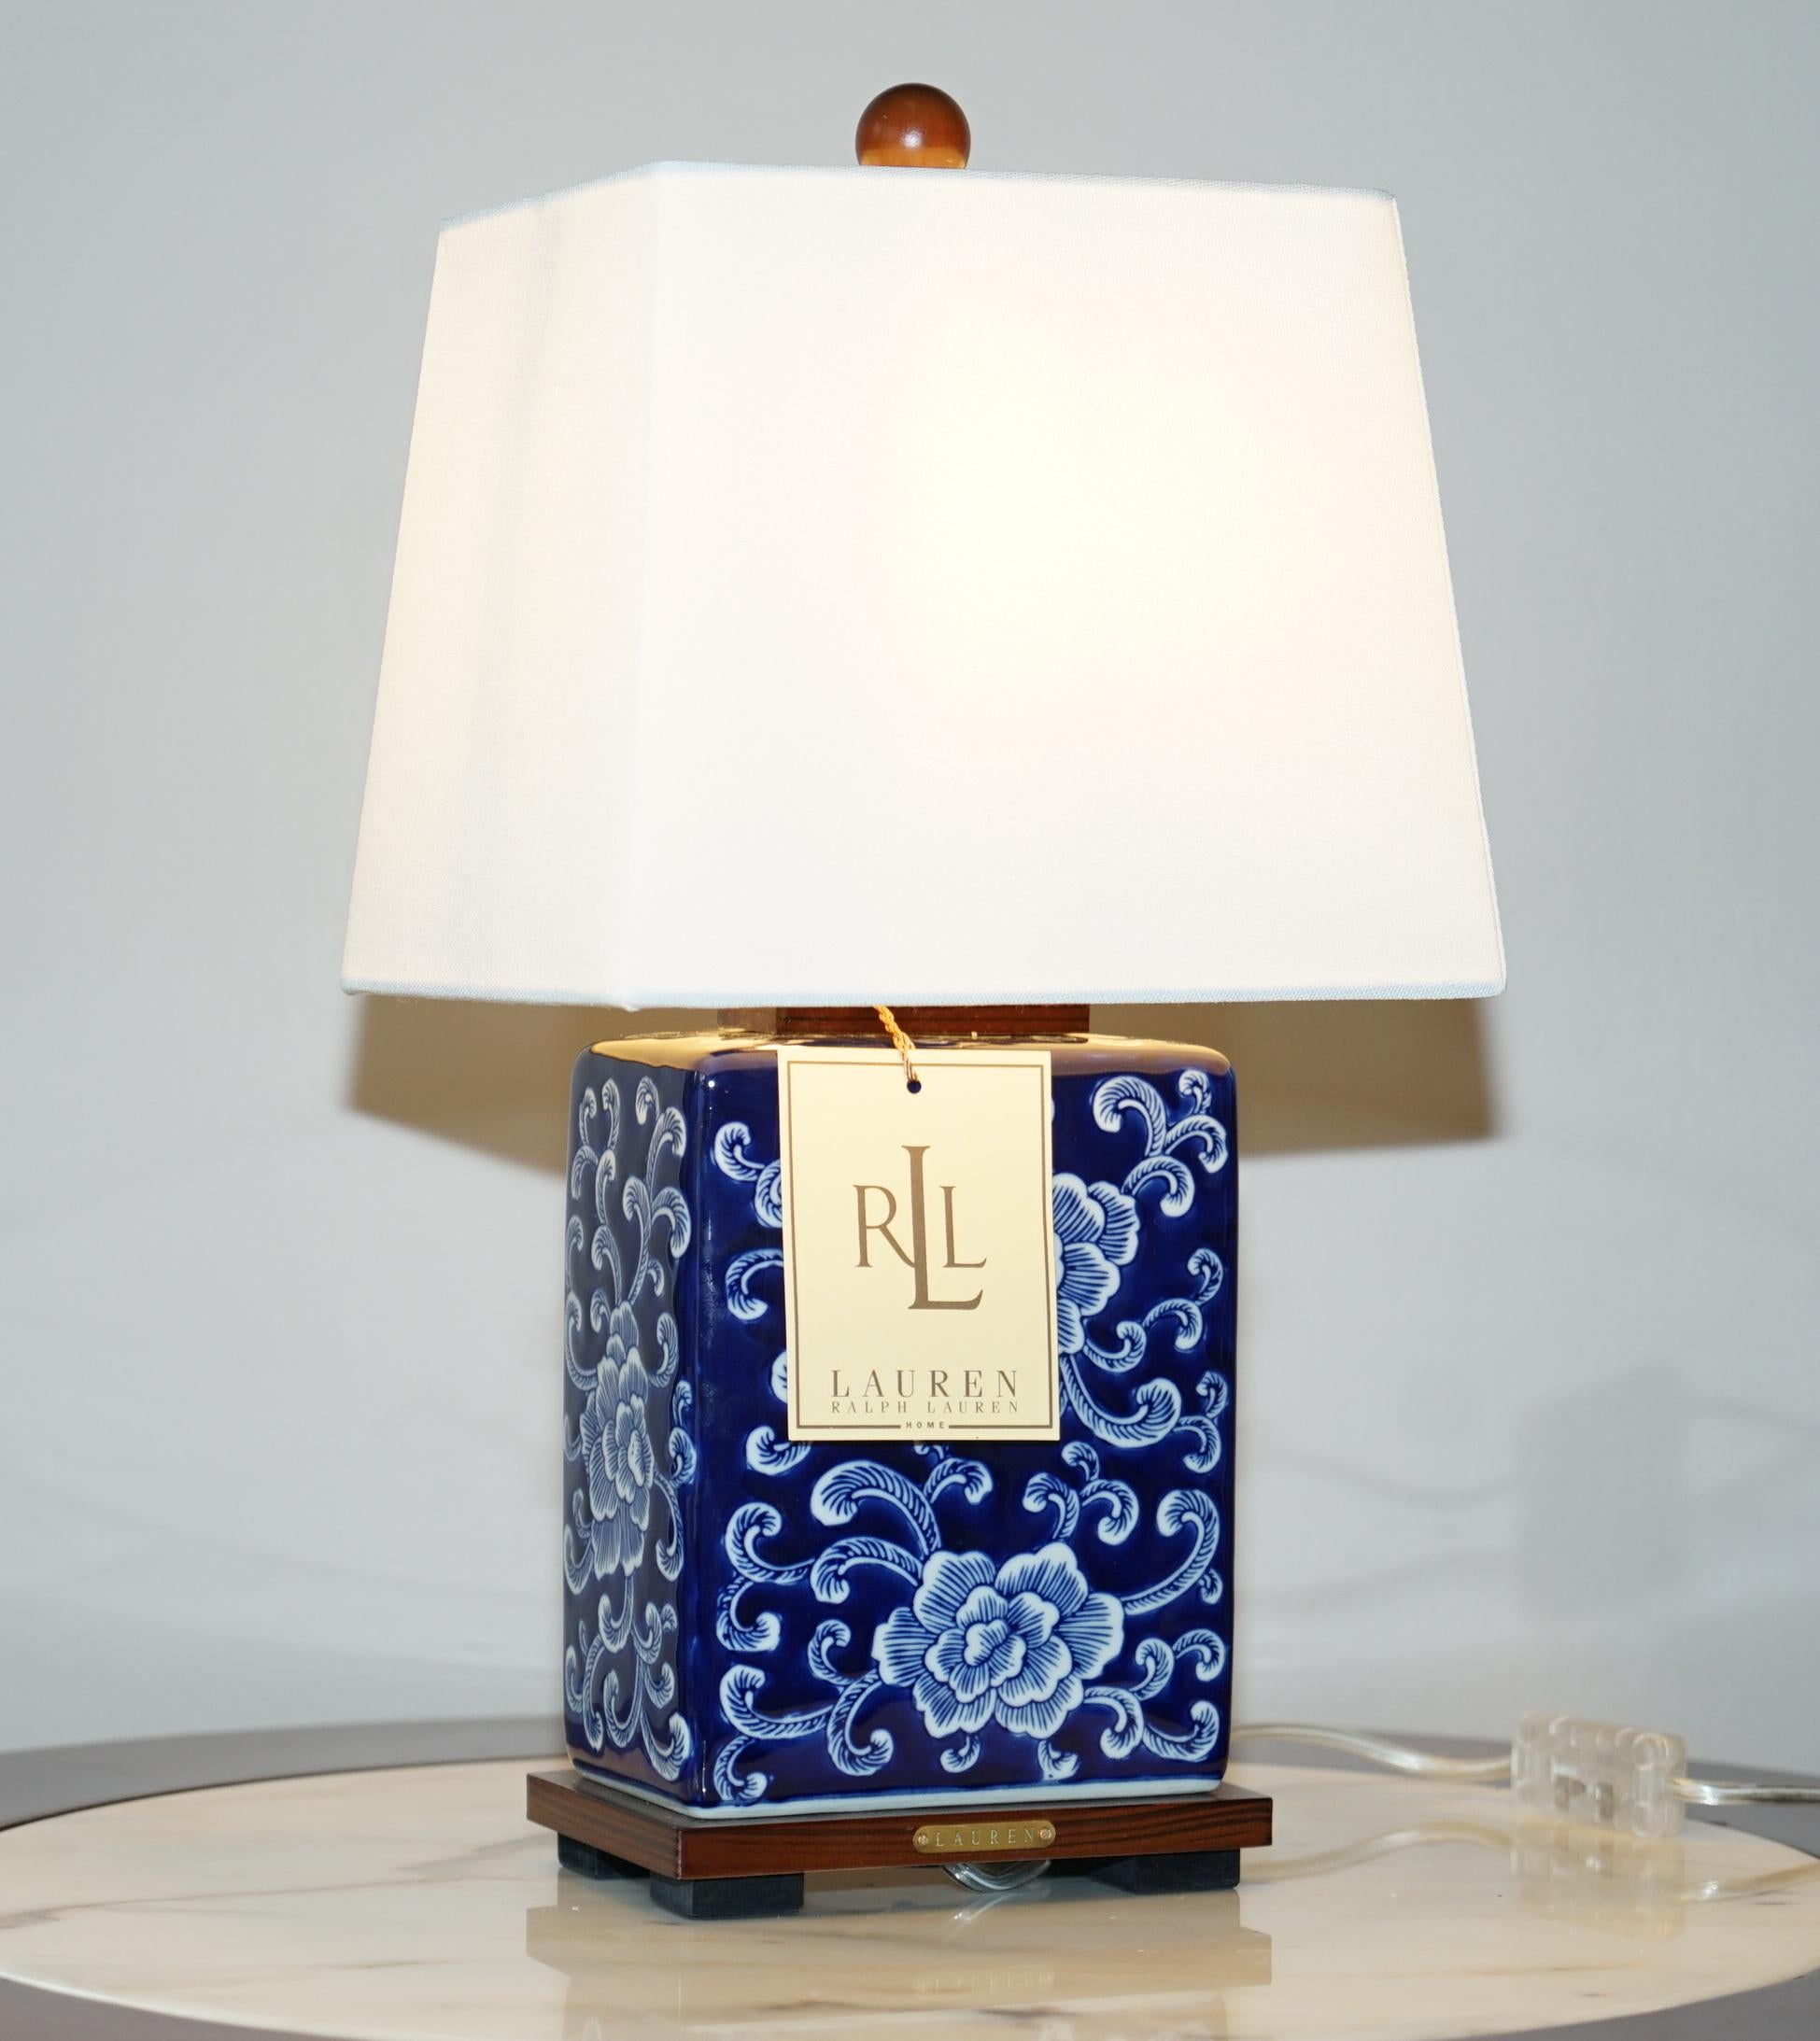 I am delighted to offer for sale this stunning pair of brand new in the original box Ralph Lauren Chinese blue Porcelain lamps with original shades

I have a number of brand new Ralph Lauren rugs and lamps in stock plus various Tommy Hilfiger